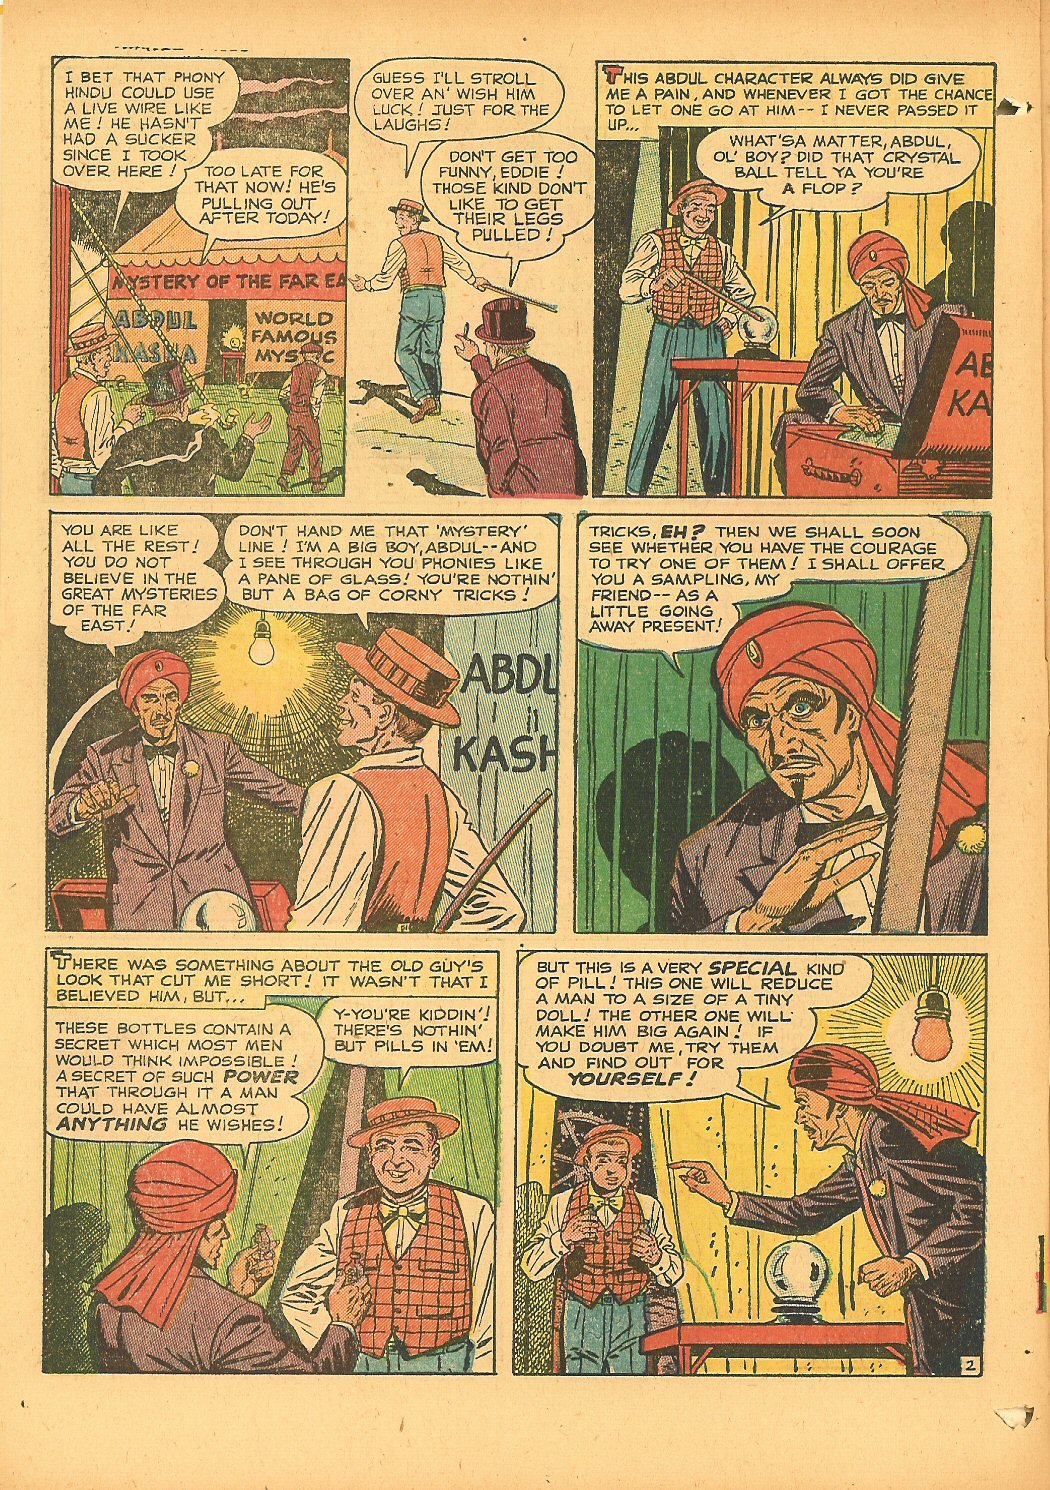 Marvel Tales (1949) 100 Page 2